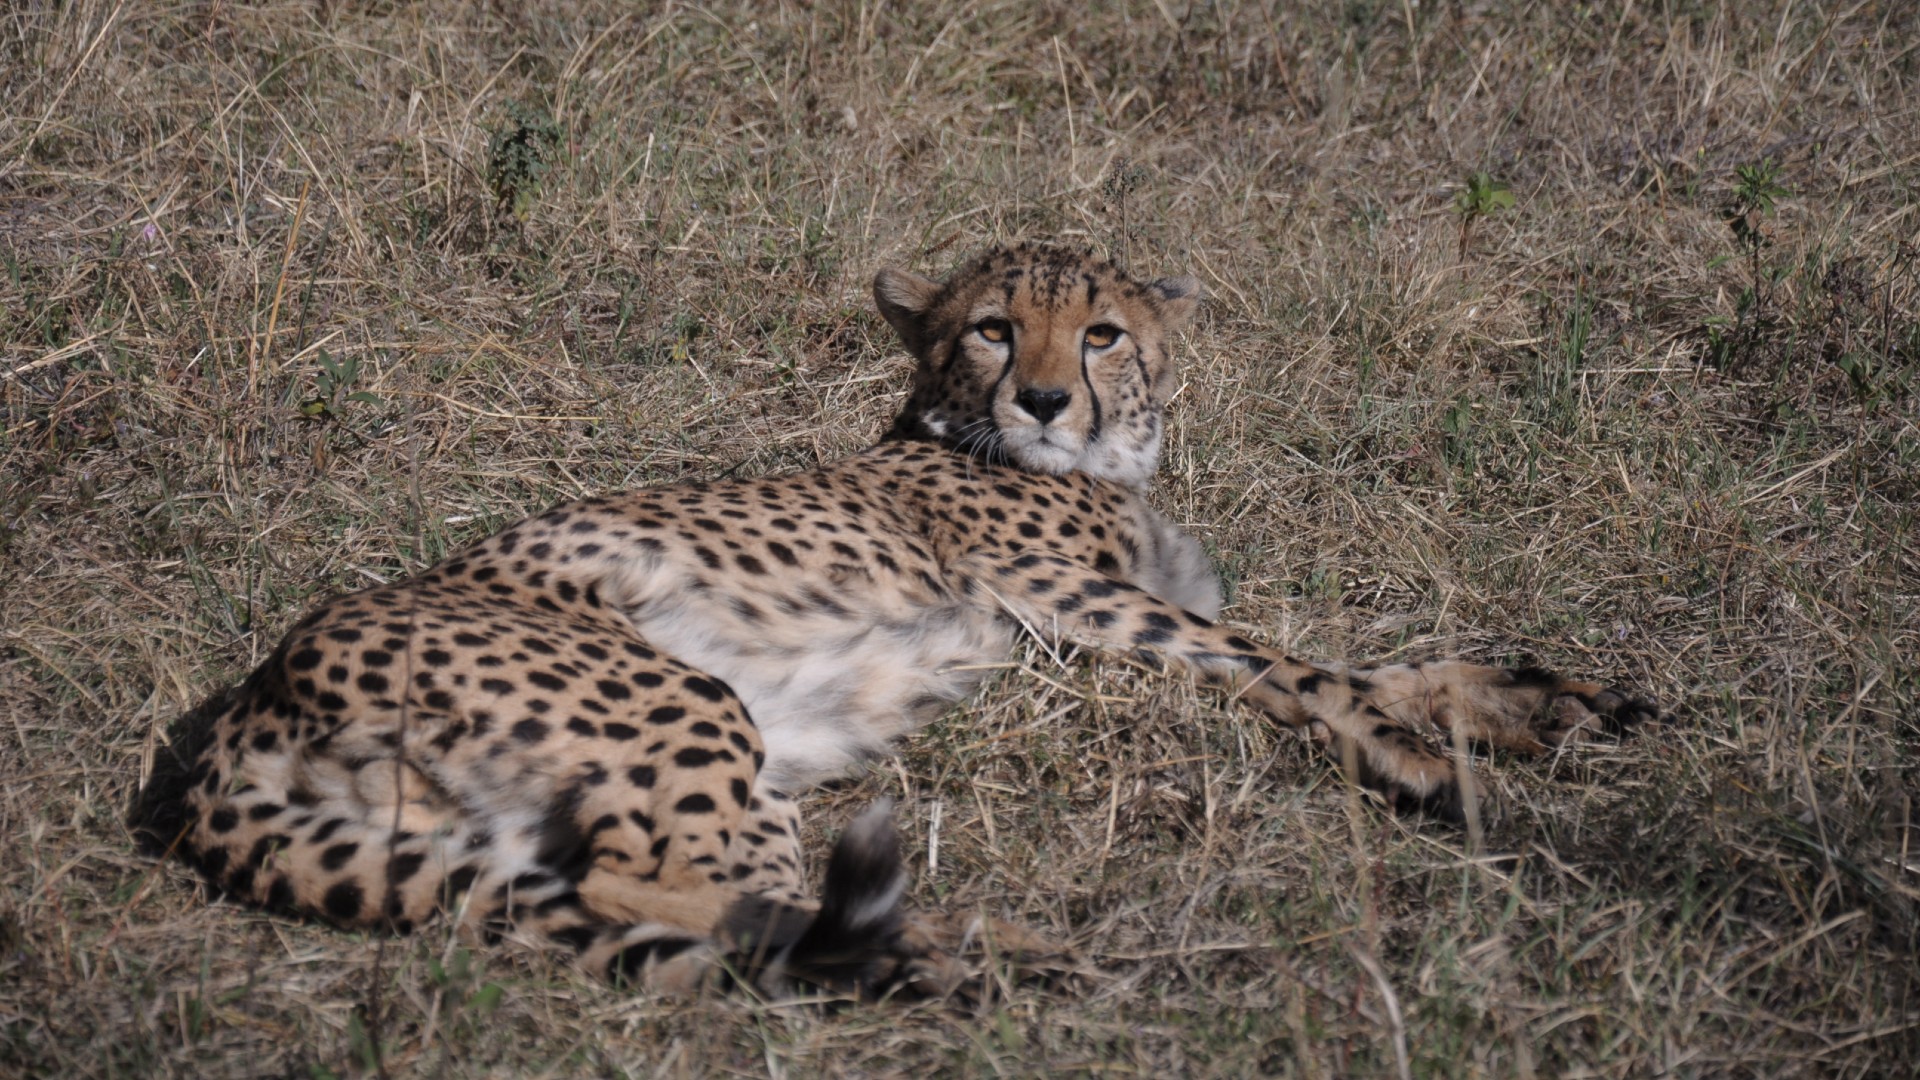 An adult cheetah lying on the grass looking relaxed.